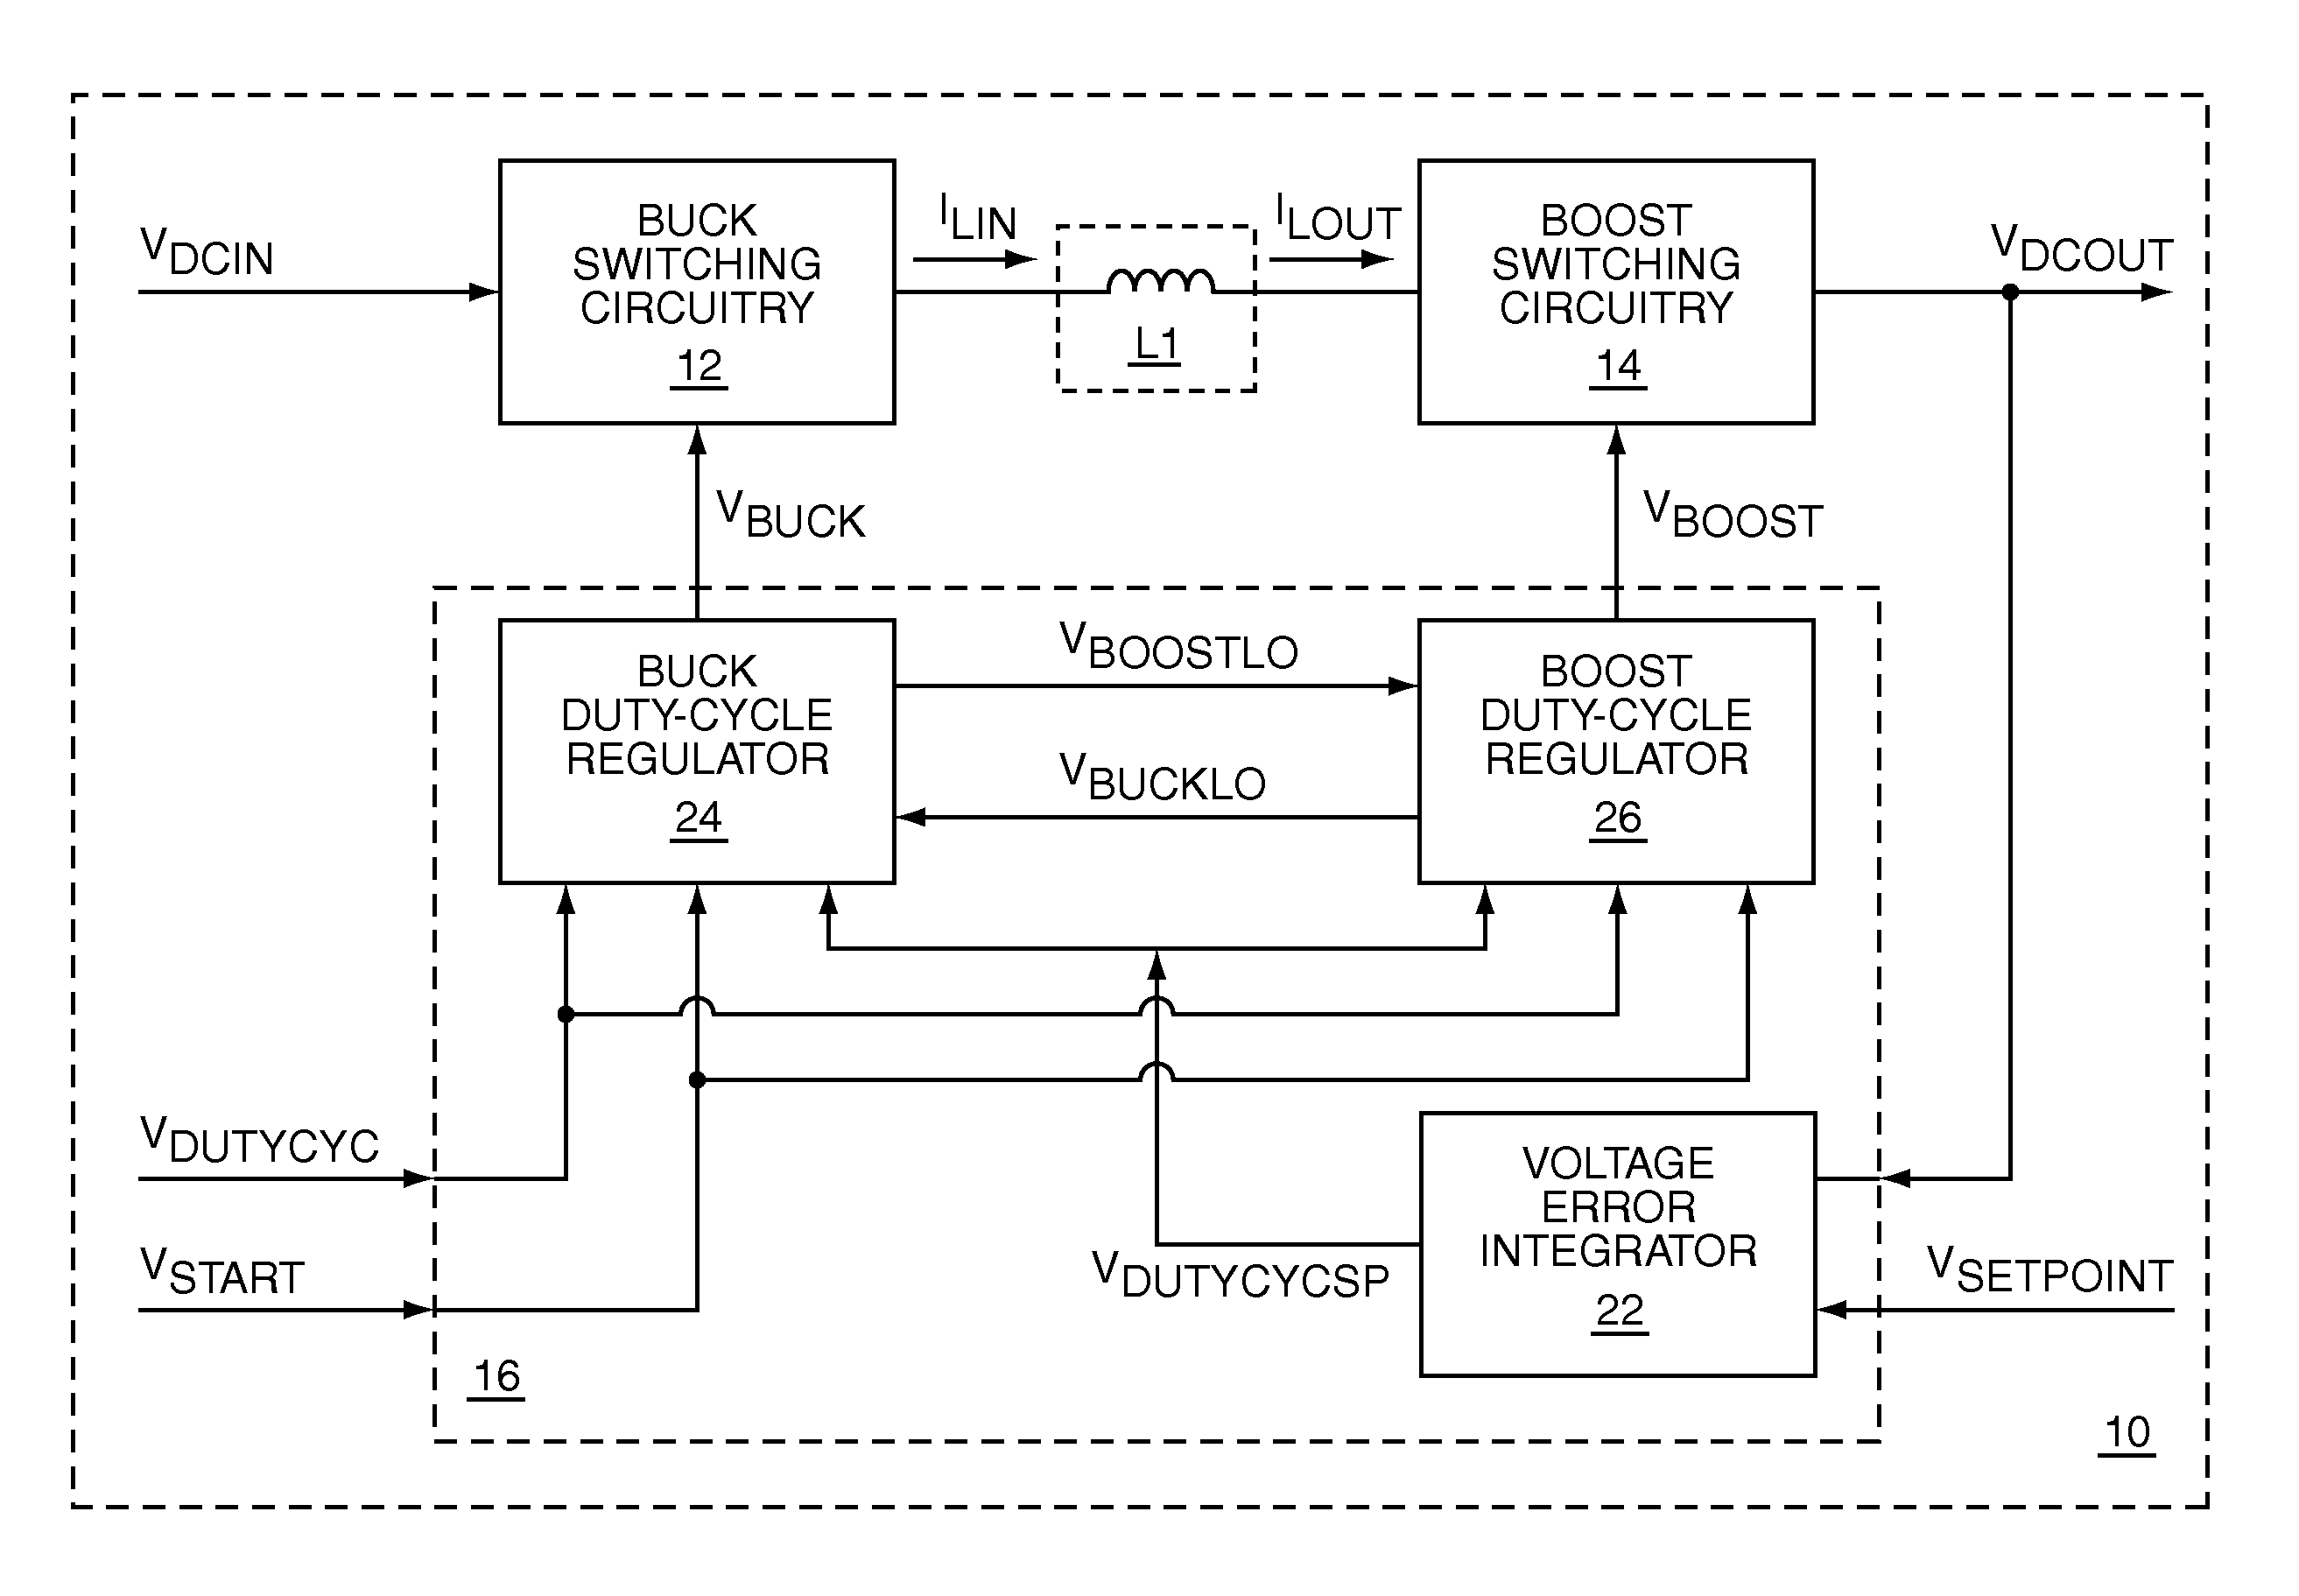 Switching power converter that supports both a boost mode of operation and a buck mode of operation using a common duty-cycle timing signal